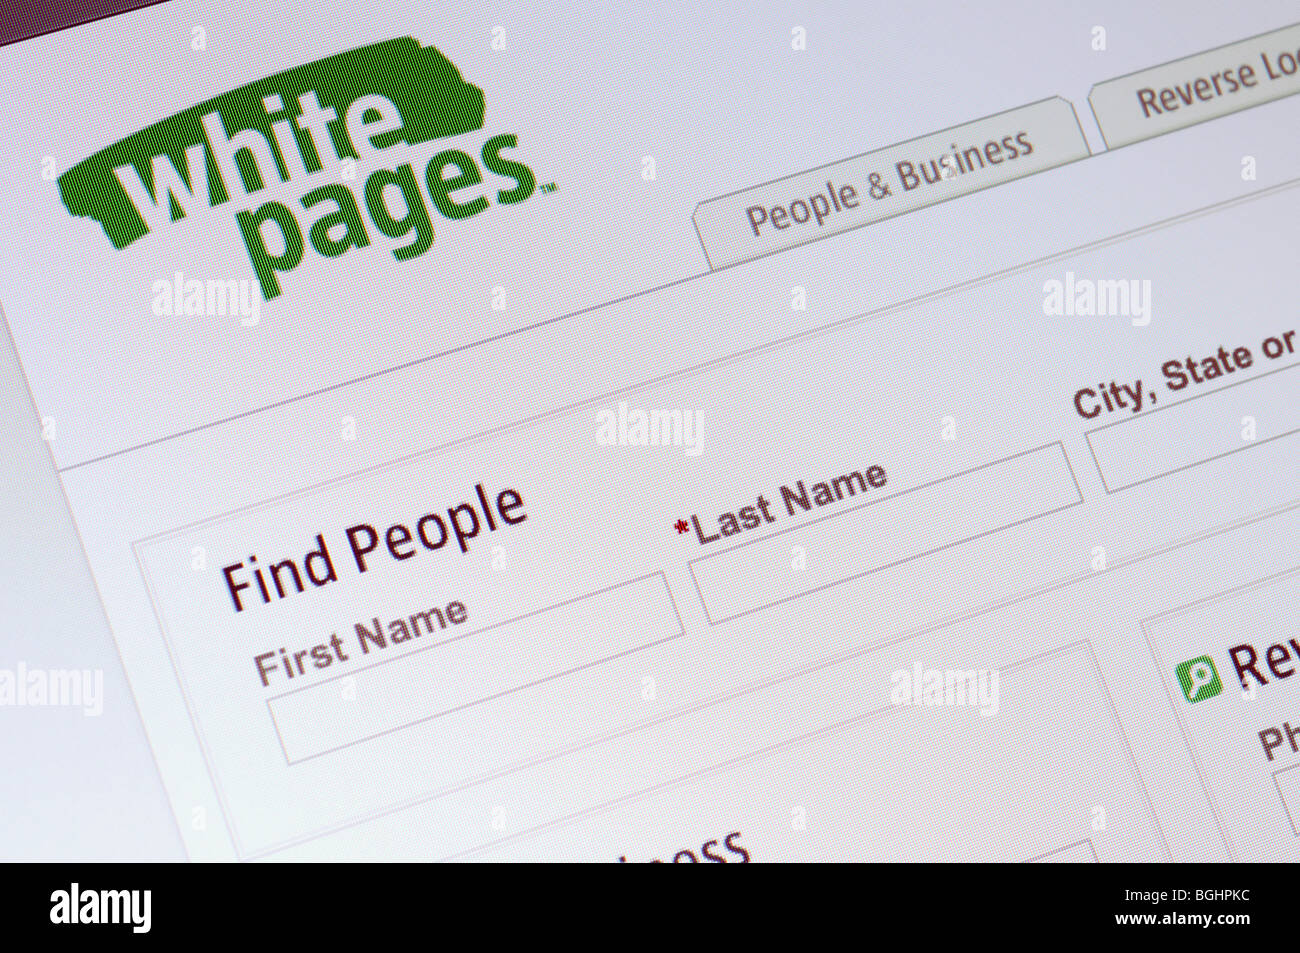 White Pages website Stockfoto